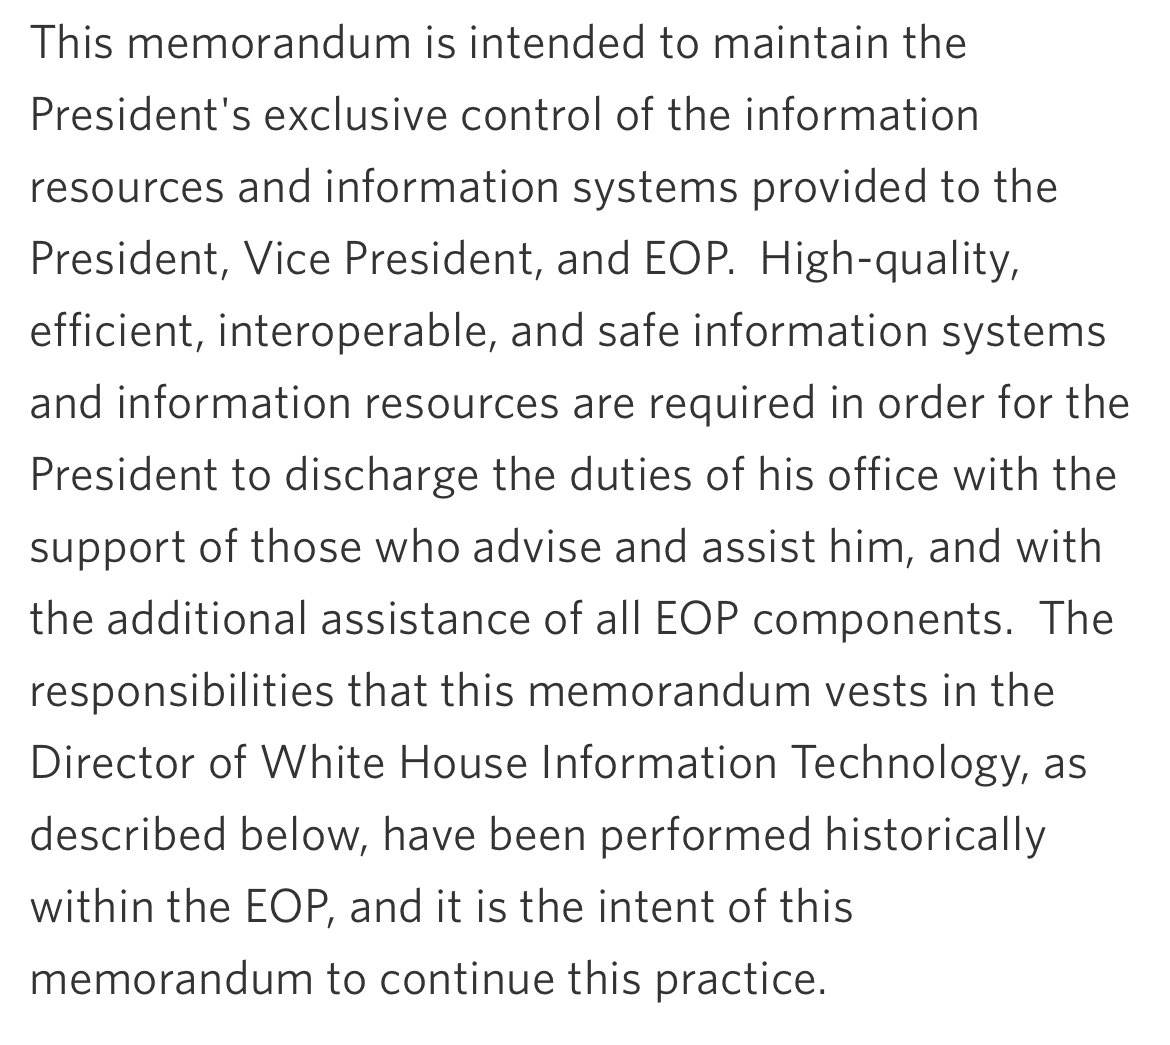 /17 Moreover, PITC explains how the President controls all the records: 'This memorandum is intended to maintain the President's exclusive control of the information resources and information systems provided to the President, Vice President, and EOP.'  obamawhitehouse.archives.gov/the-press-offi…